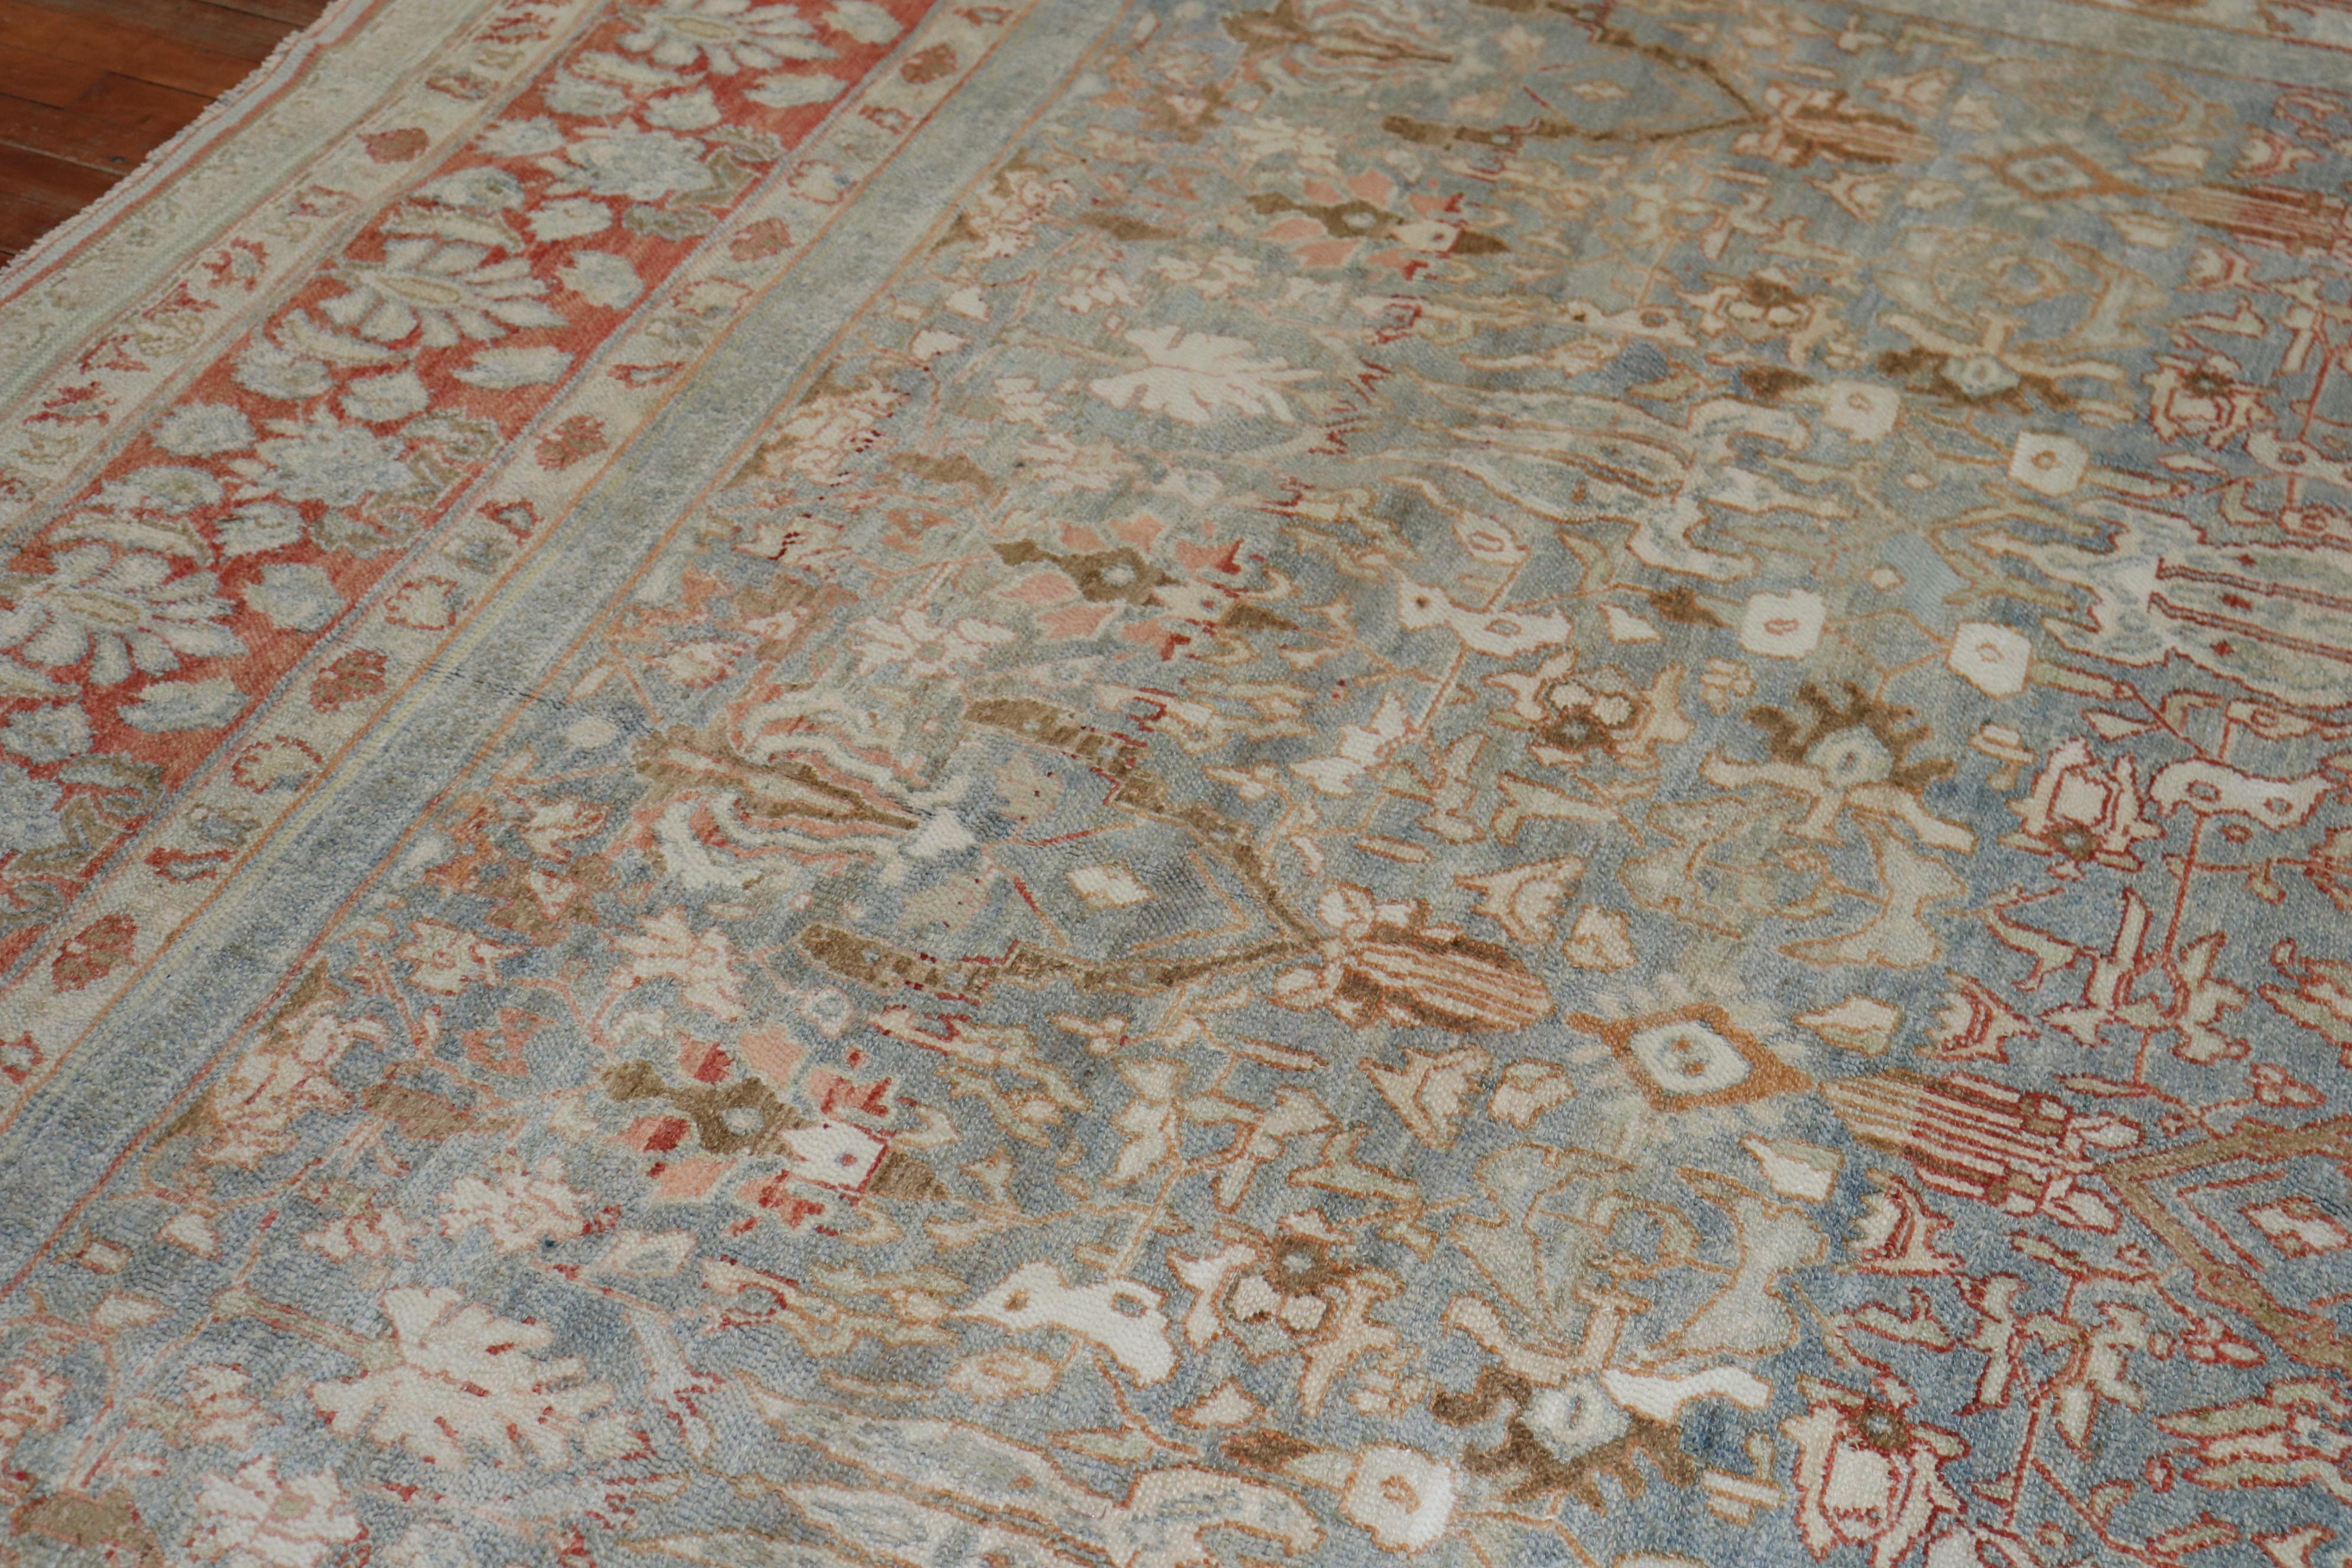 Decorative Oversize Gray Blue Persian Bibikabad Rug, Early 20th Century For Sale 2